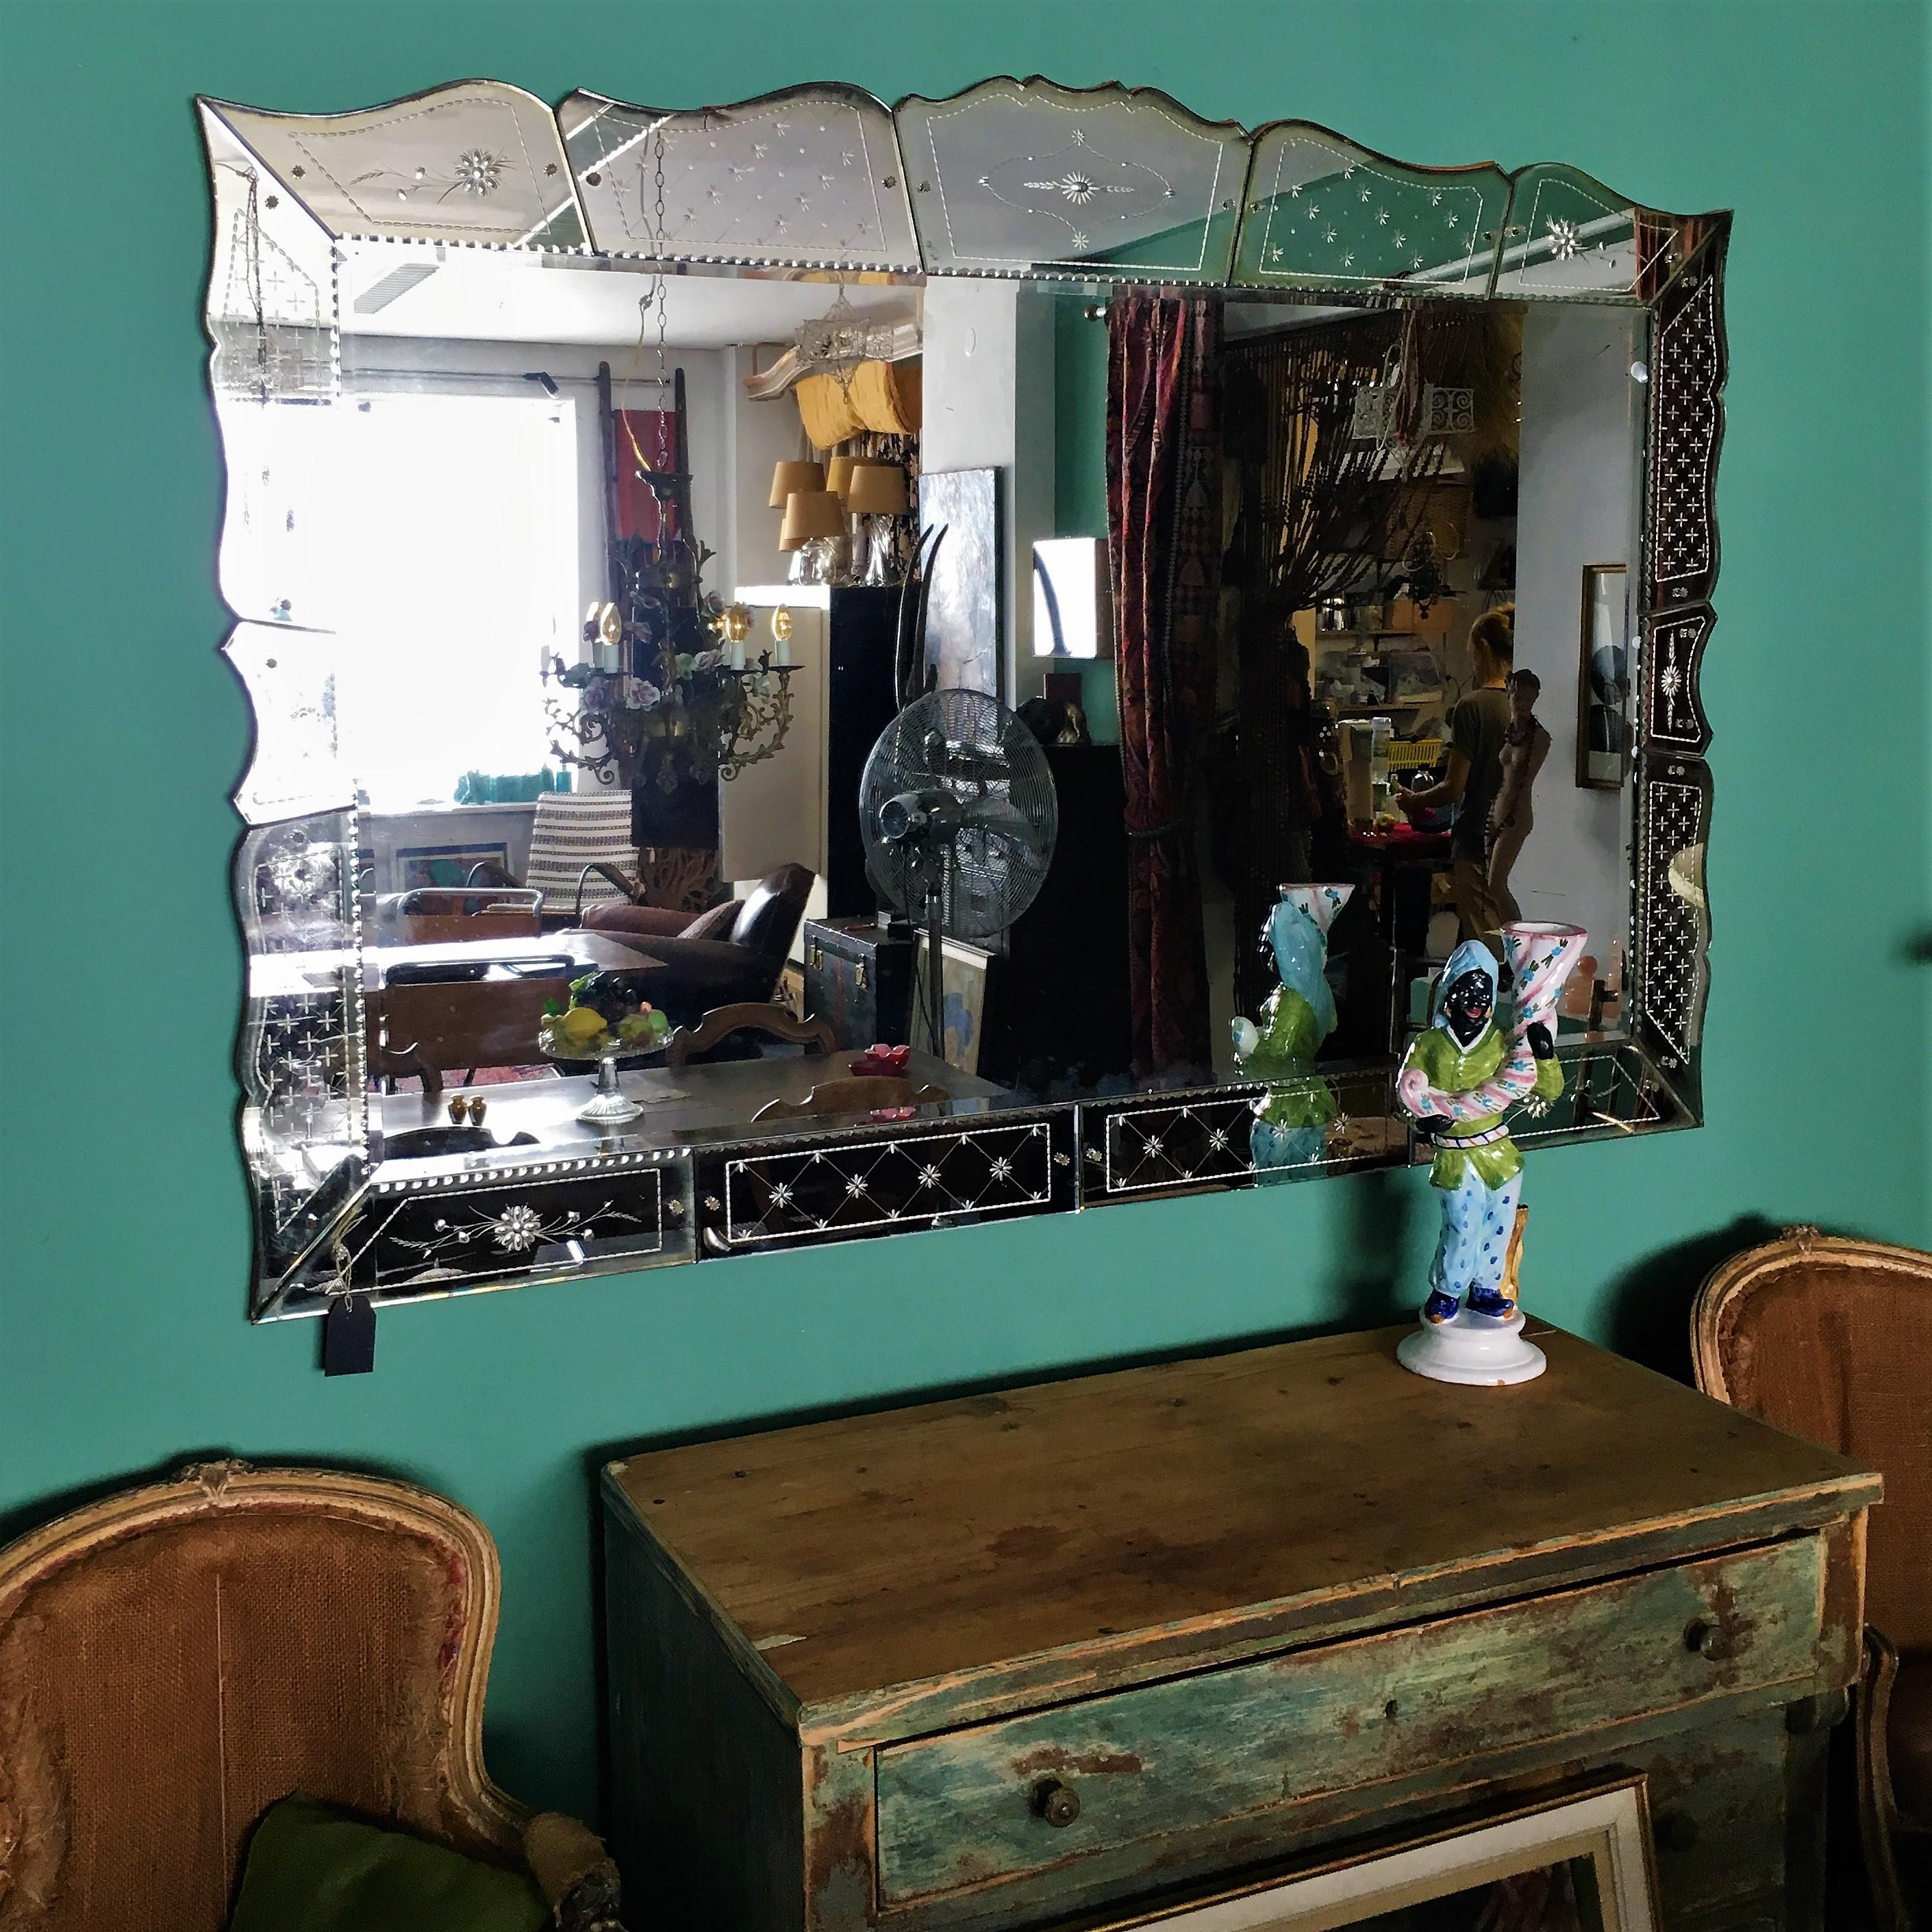 Wonderful large 20th century French mirror. 
The sides of the mirror may be disassembled, however the large inside mirror remains at 100cm x 160cm.
Please view the detailed pictures as they form part of the description around the condition.